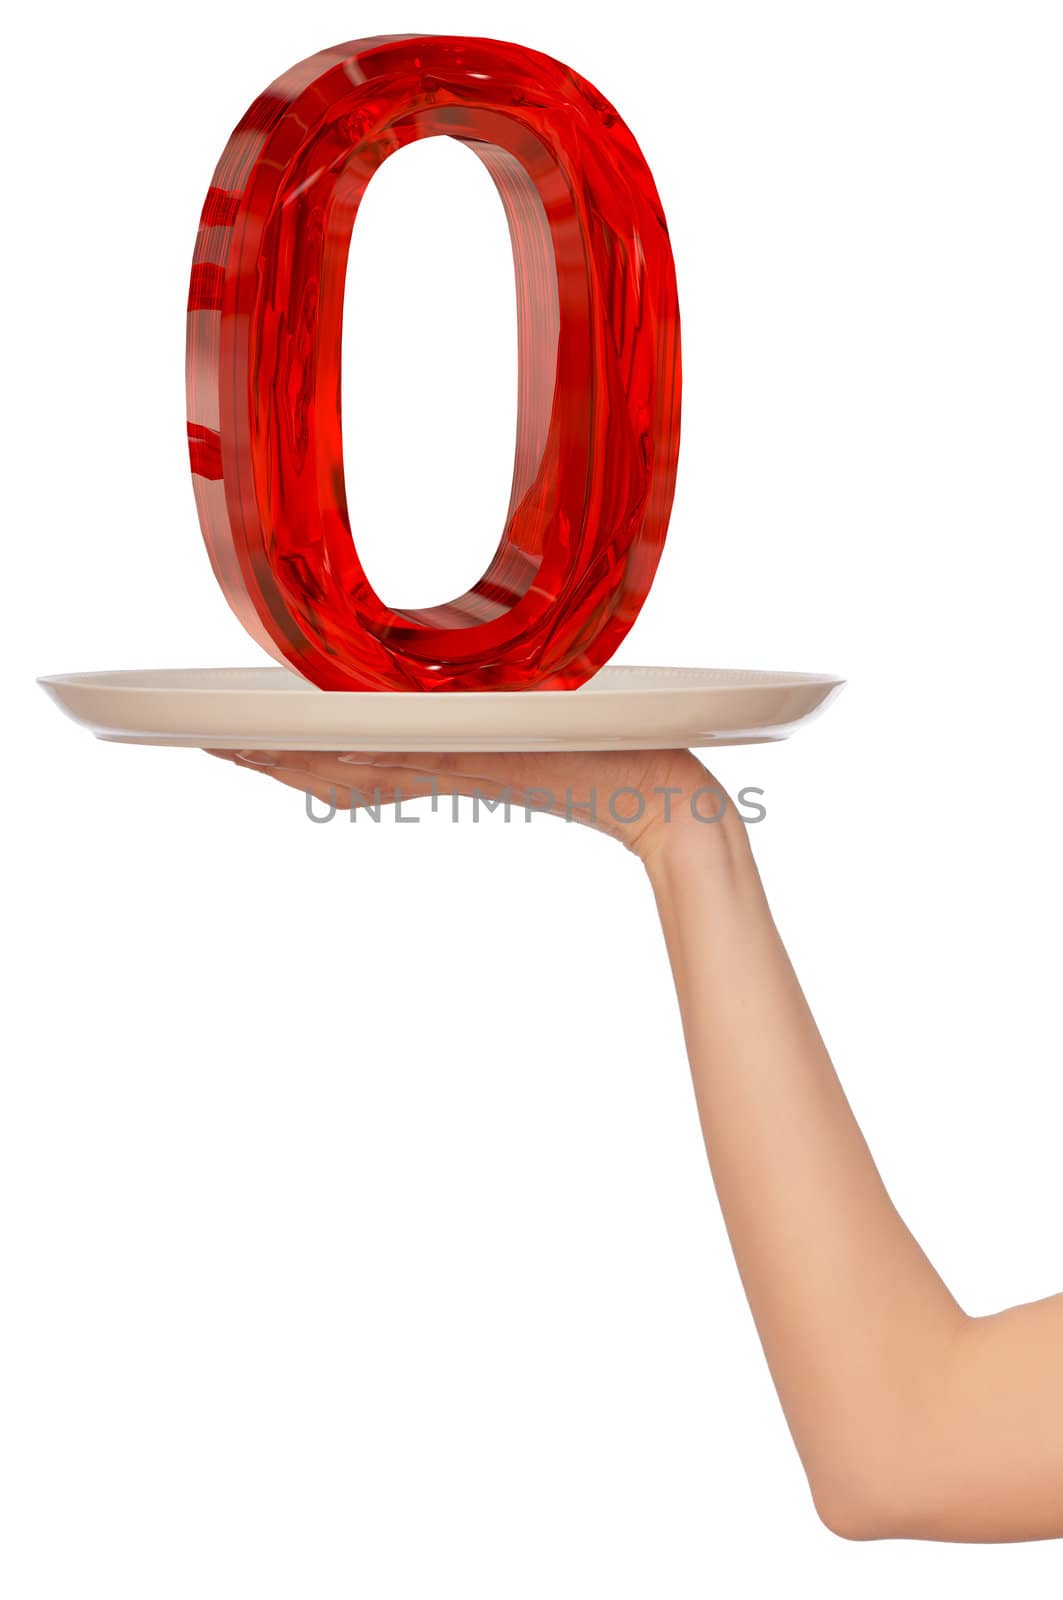 big red number zero on the tray